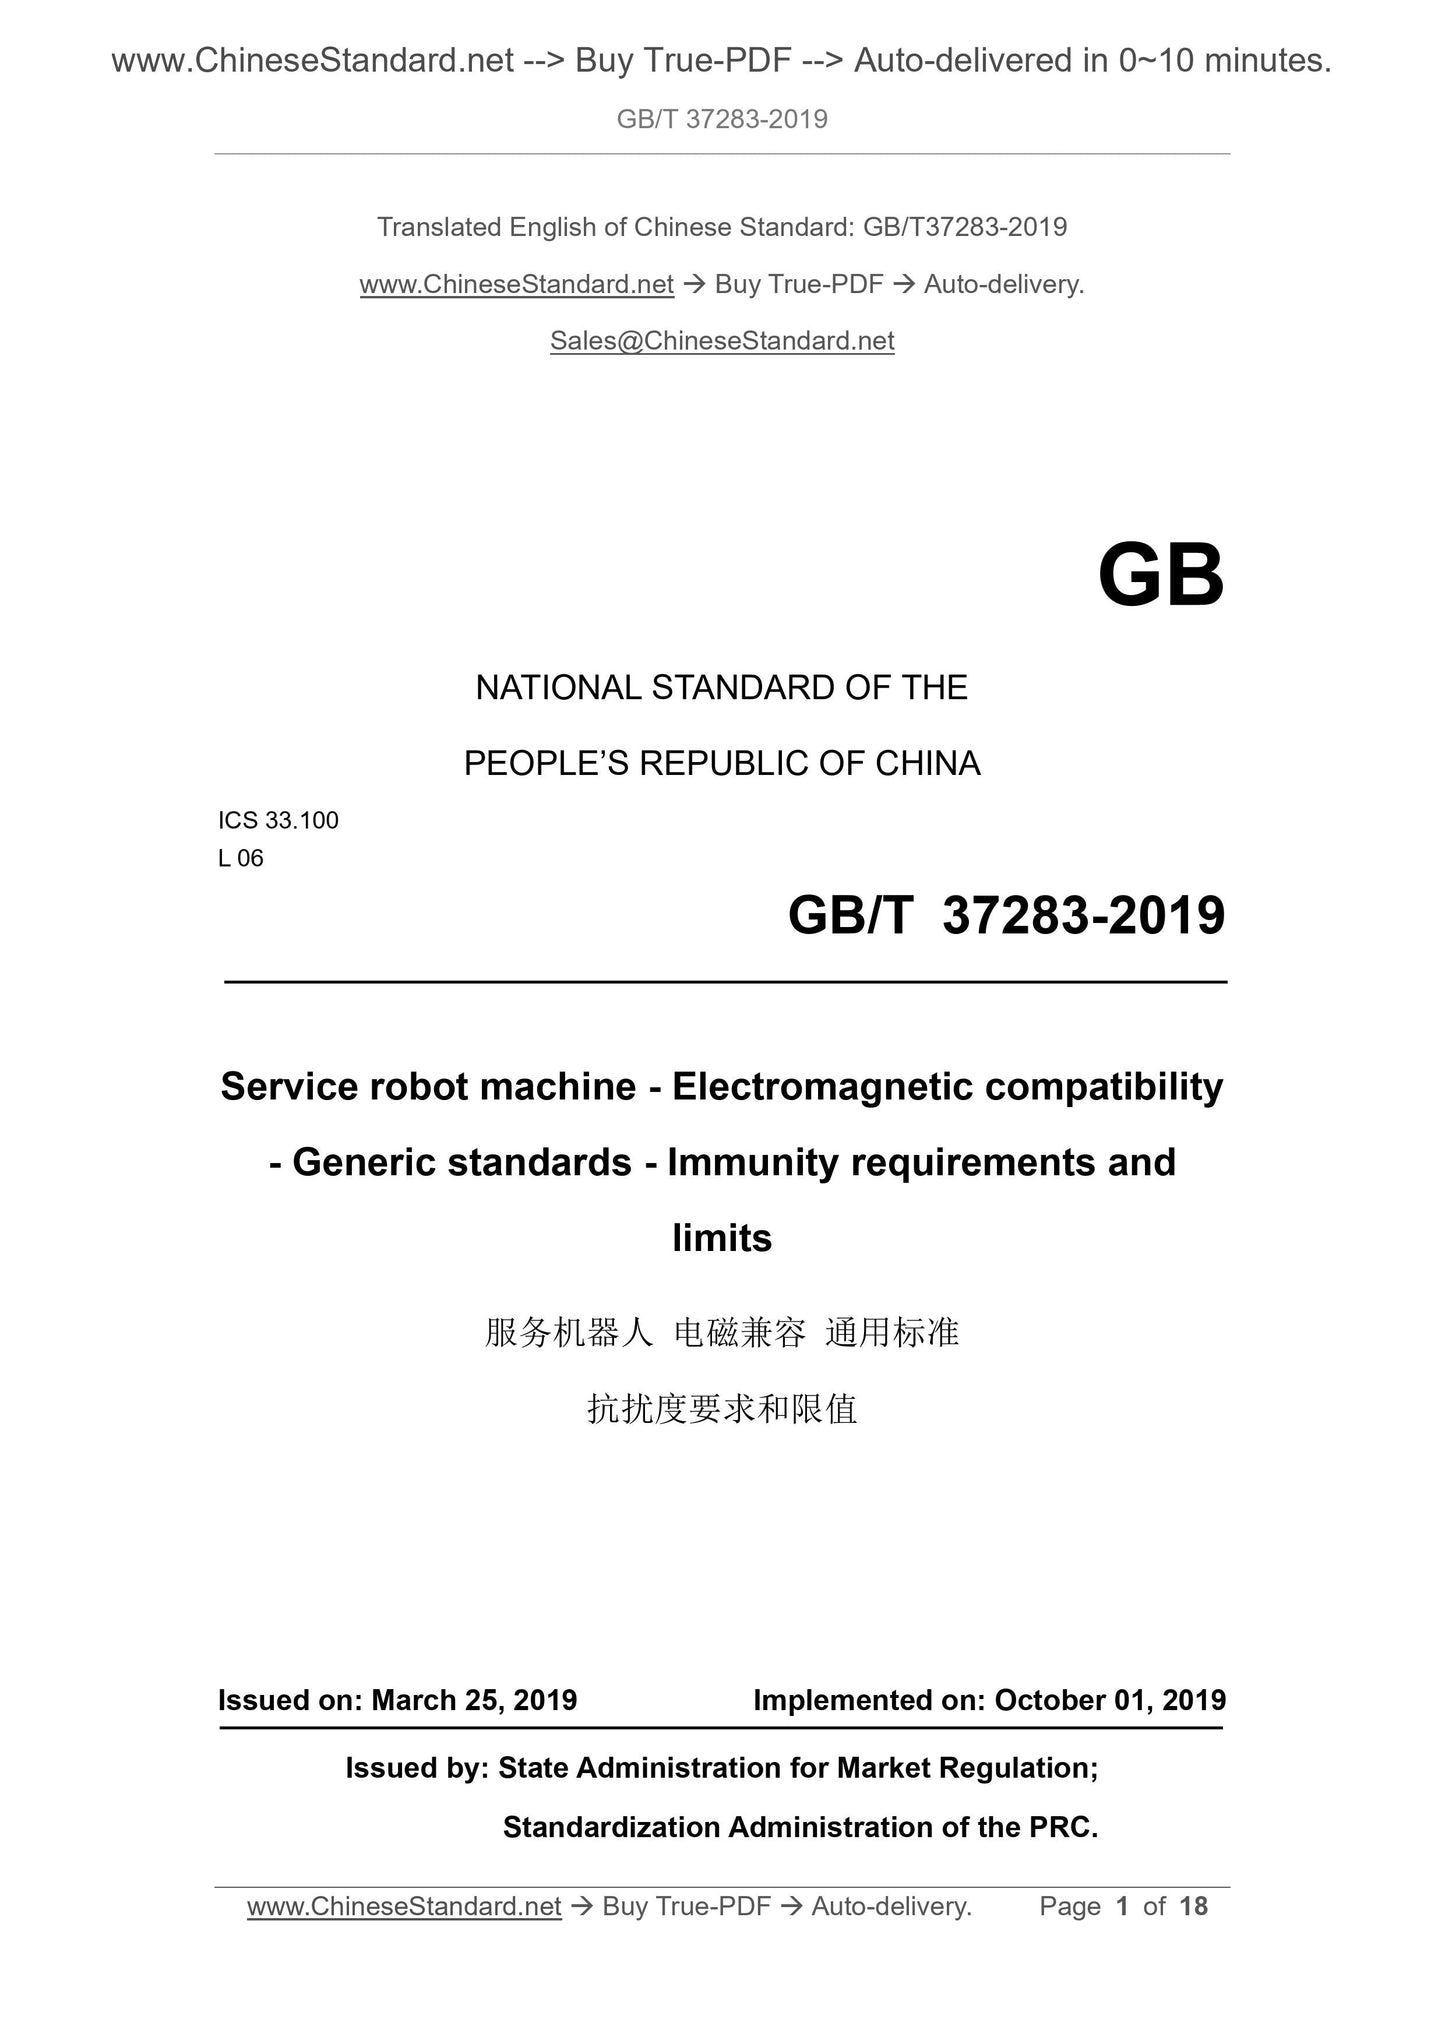 GB/T 37283-2019 Page 1